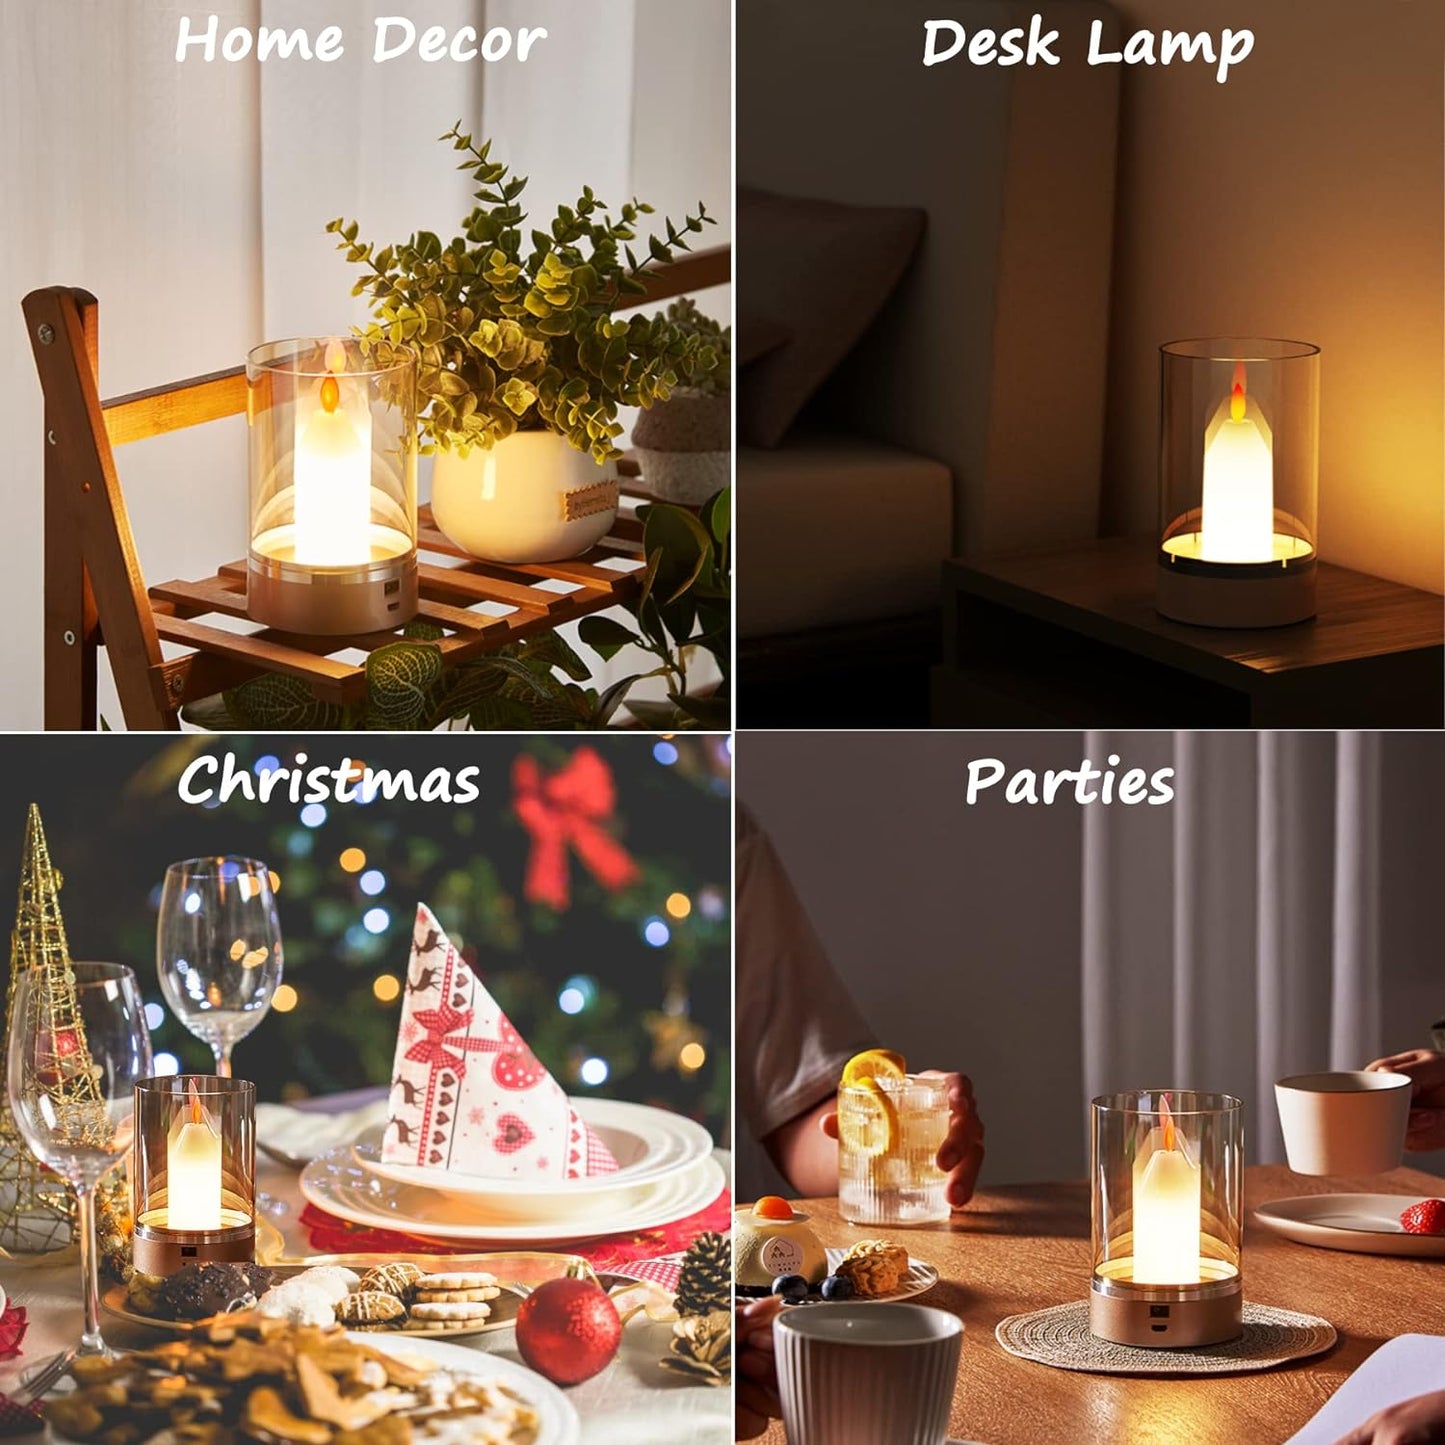 Hdc Flickering Flameless Candles, Induced Control Fake Candles with 3 Light Modes,Battery Operated Candles with Flickering Flame